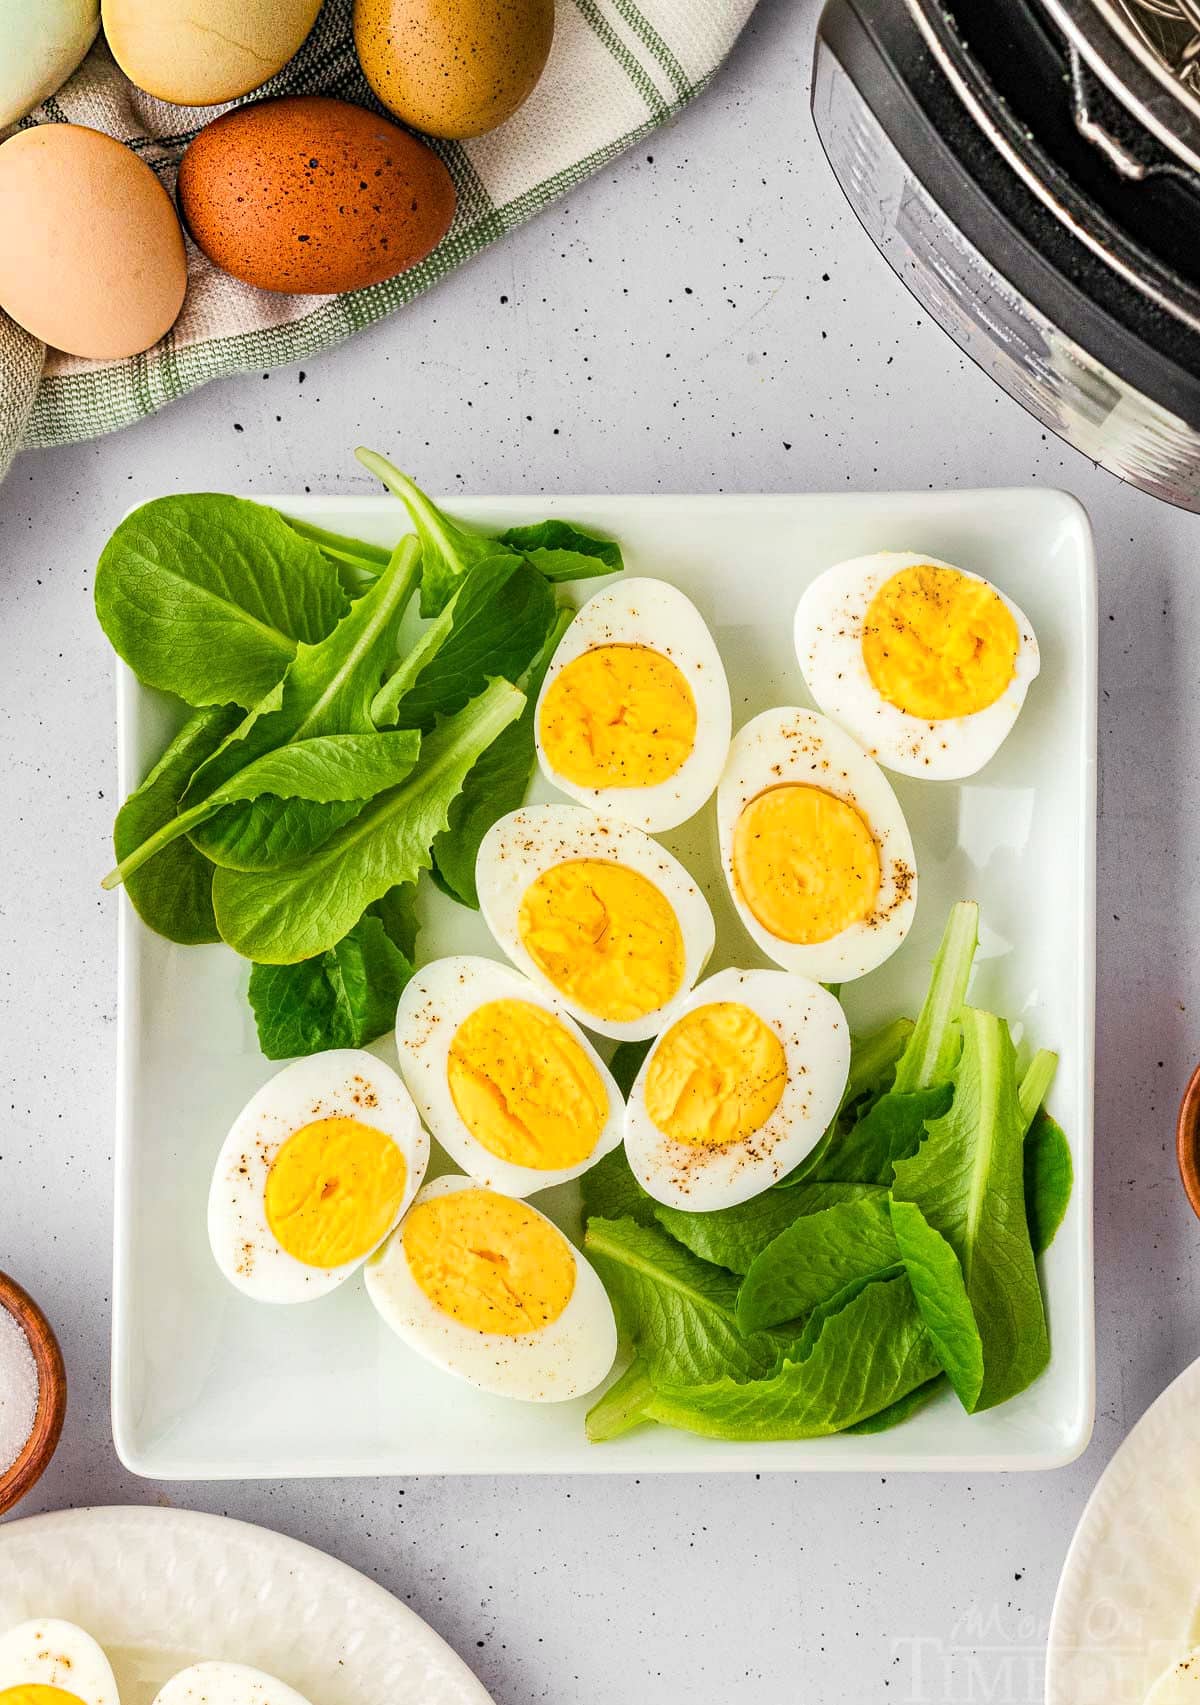 Hard boiled eggs on a bed of spinach on a white plate.